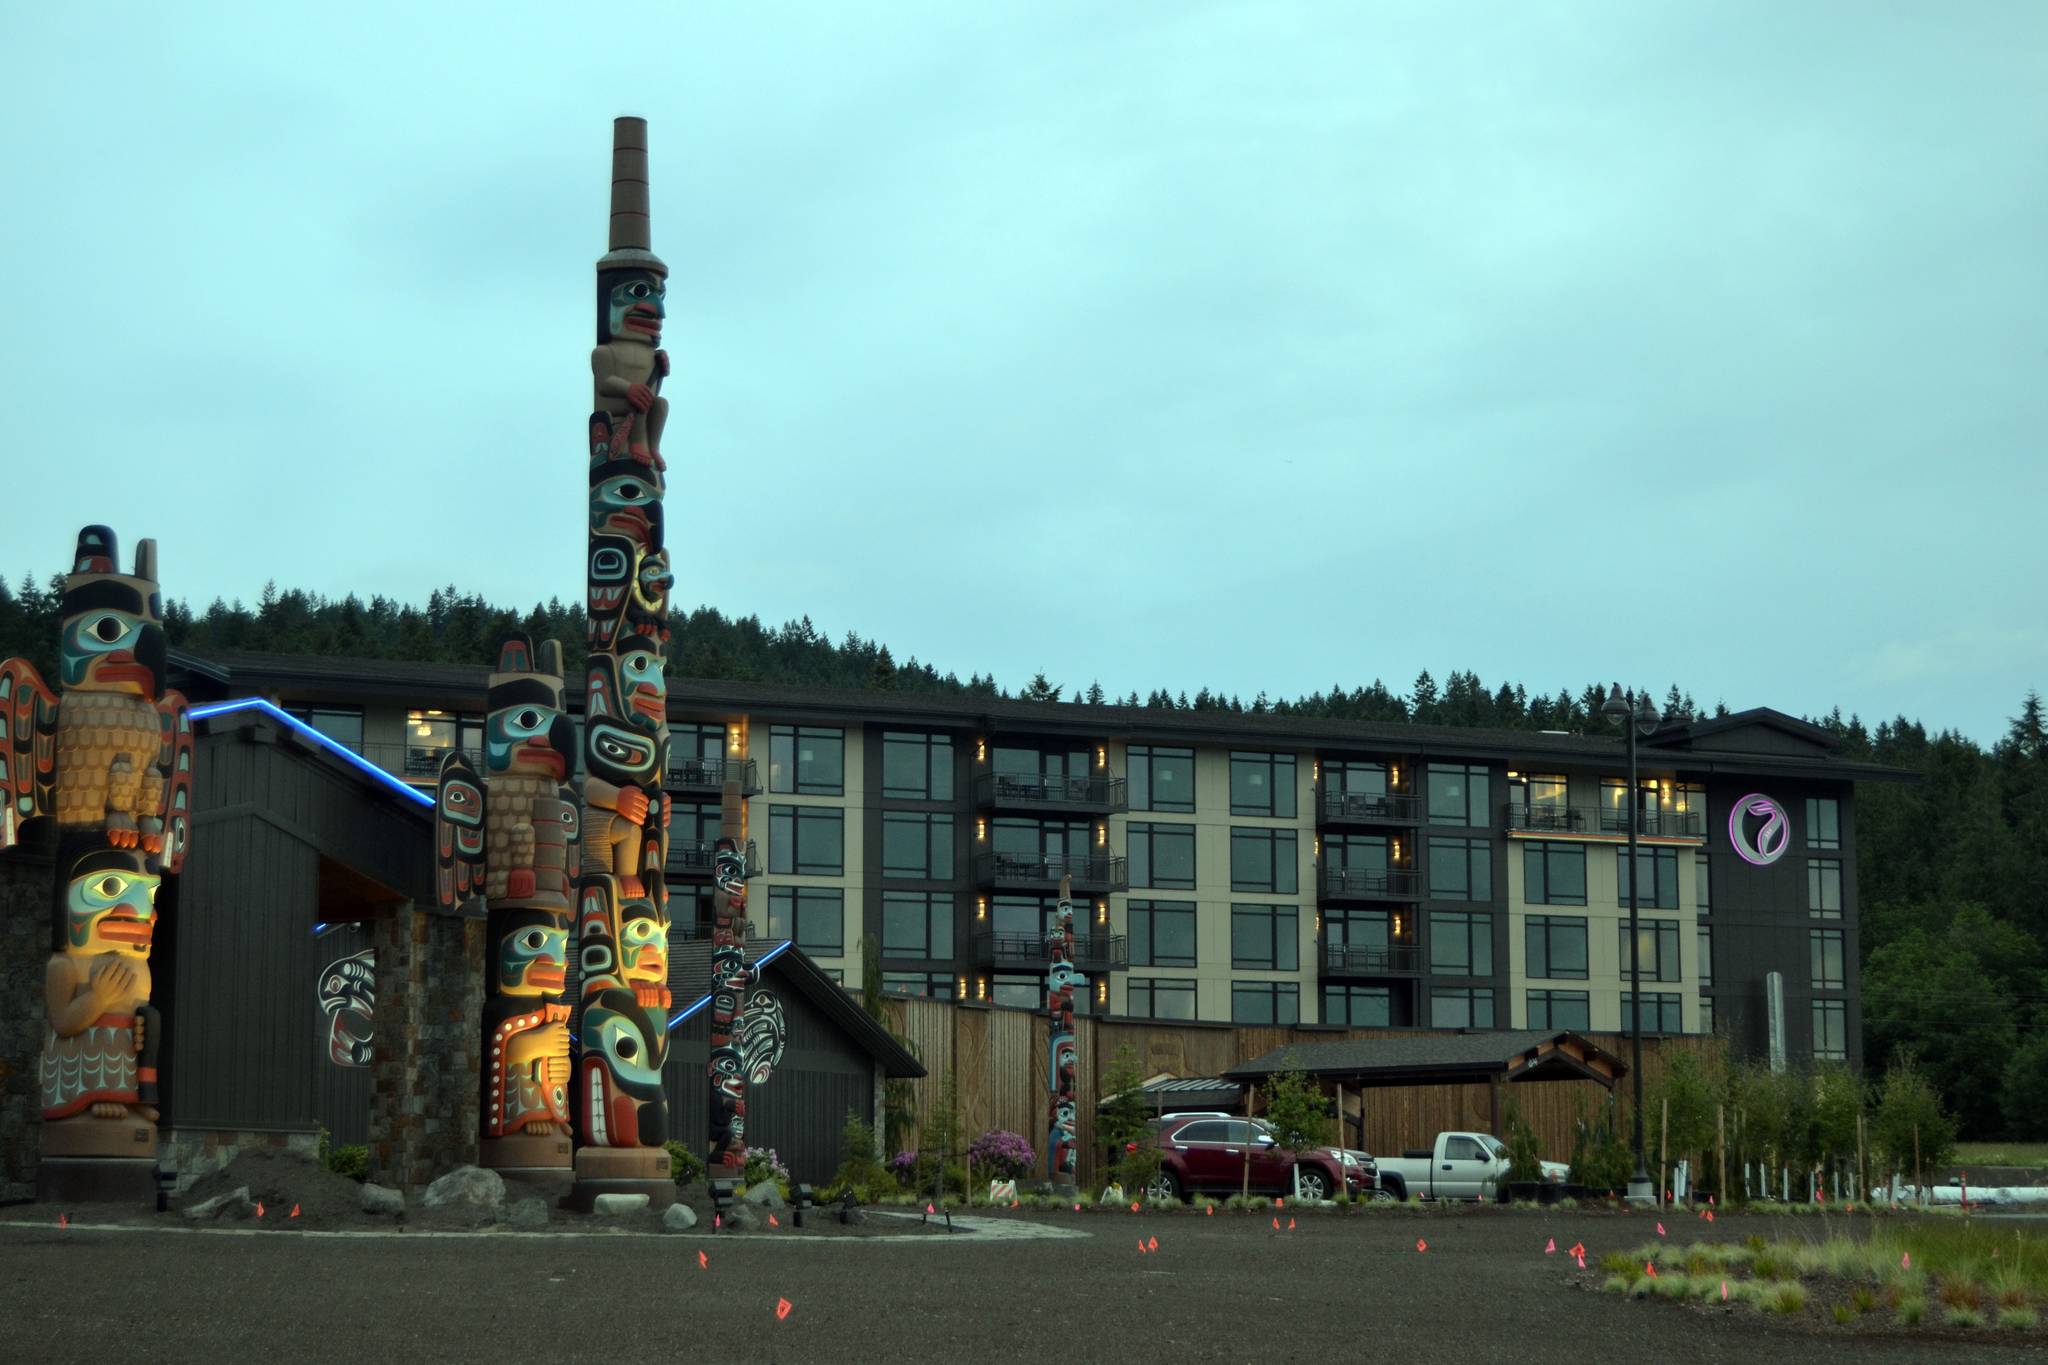 In late June, Jamestown S’Klallam Tribe’s leaders plan to connect the new hotel and its other businesses to the City of Sequim’s sewer system after decades of discussions. The connection became finalized after city officials sought a portion of an approximate $159,000 late fee the tribe owes for being late to connect. Tribal officials paid $50,000 the same day they were requested to pay an upfront cost to connect. Sequim Gazette photo by Matthew Nash